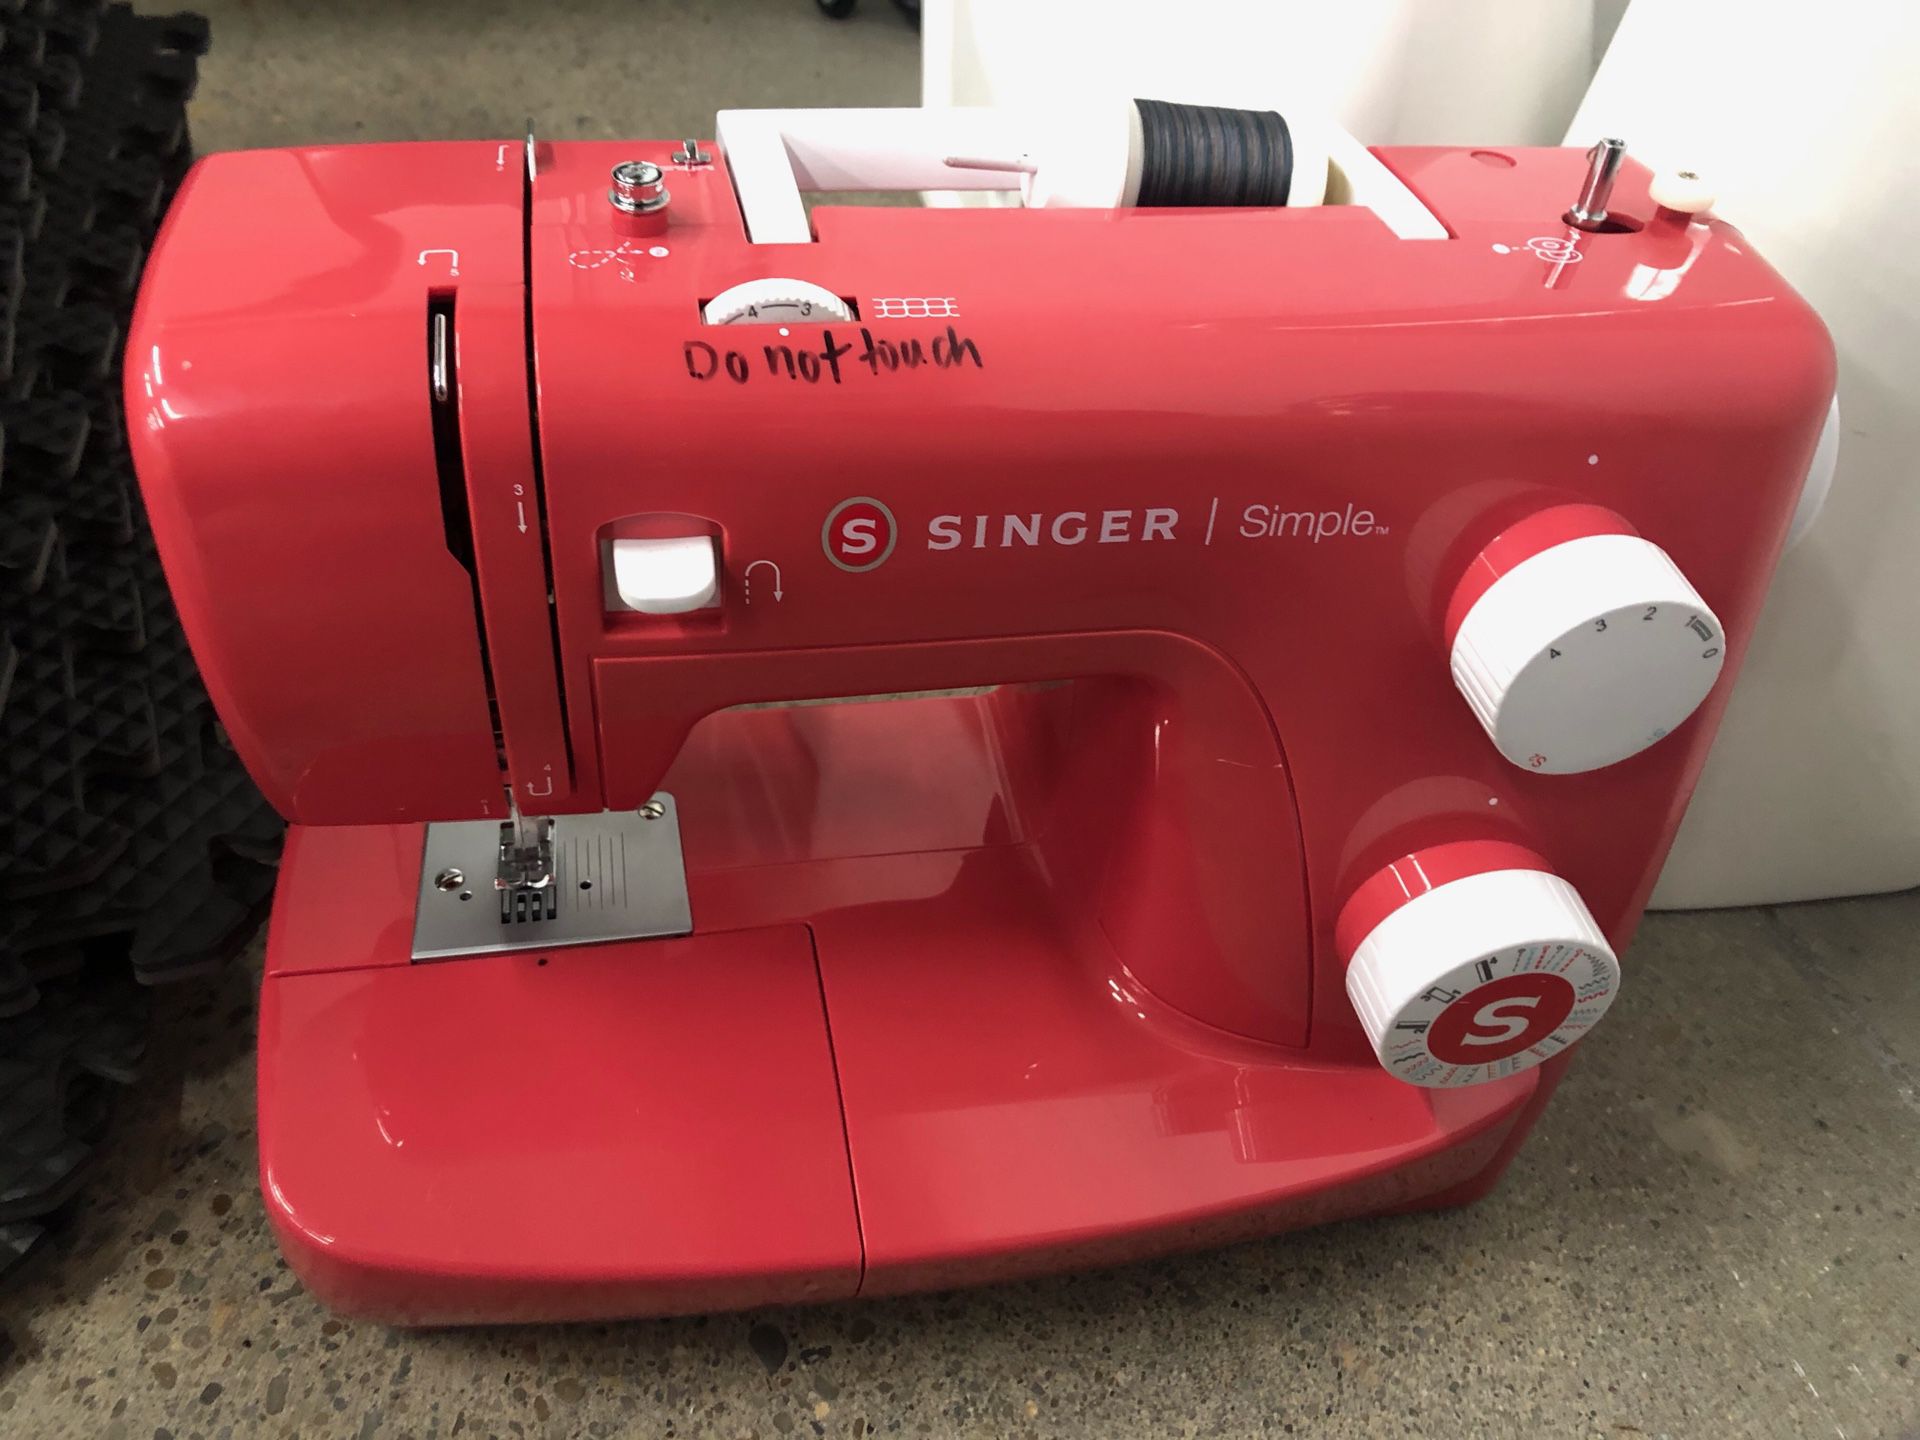 Hardly used Singer “Simple” Sewing Machine